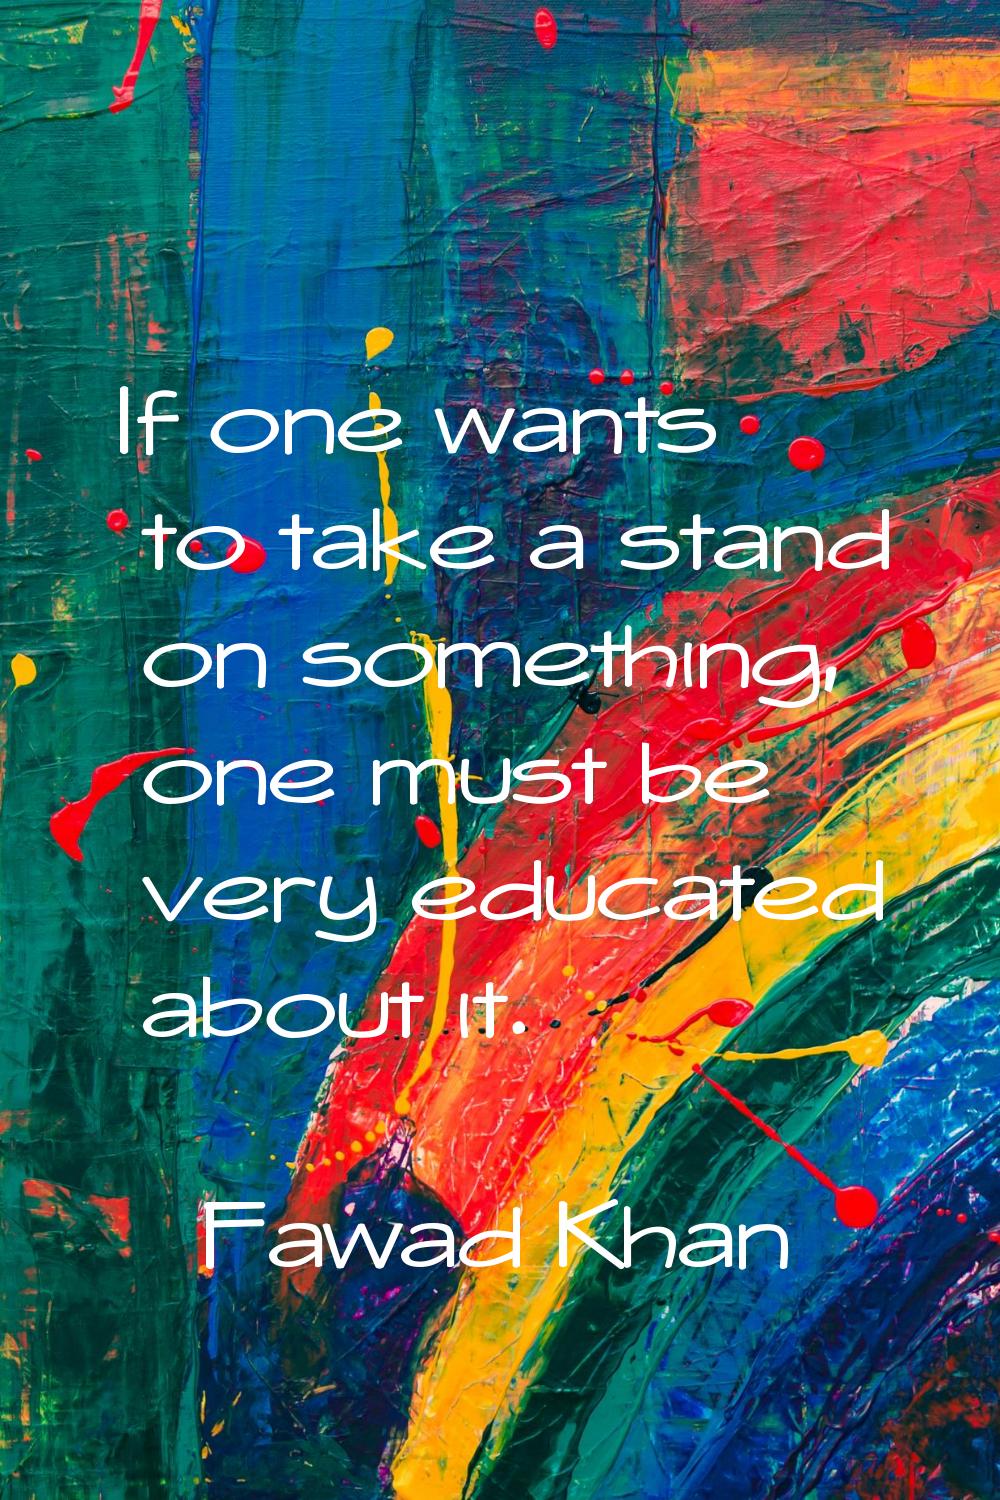 If one wants to take a stand on something, one must be very educated about it.